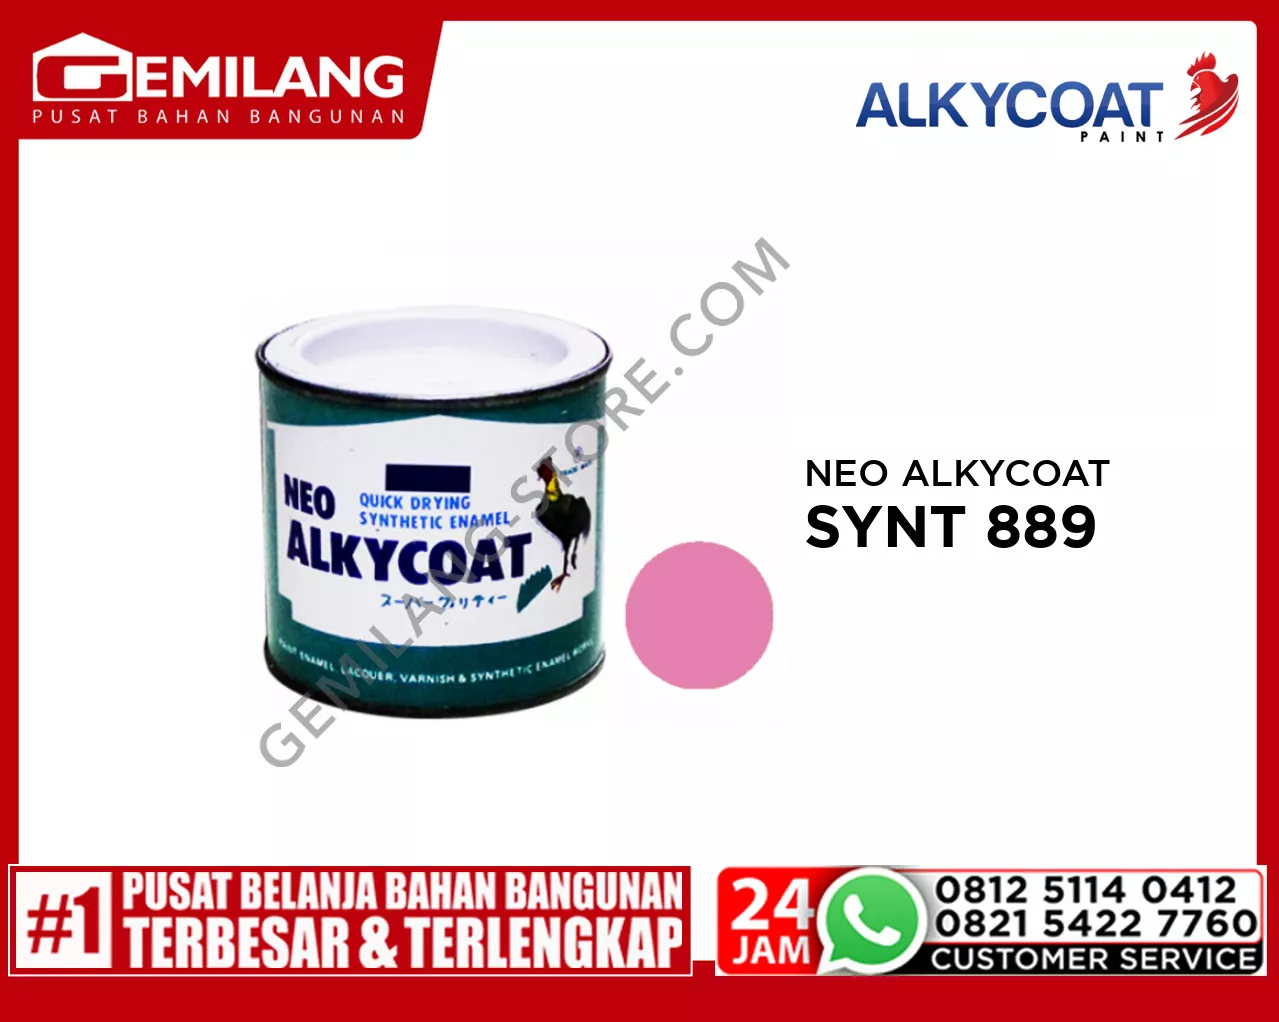 NEO ALKYCOAT SYNT 886 LIGHT PINK 200cc